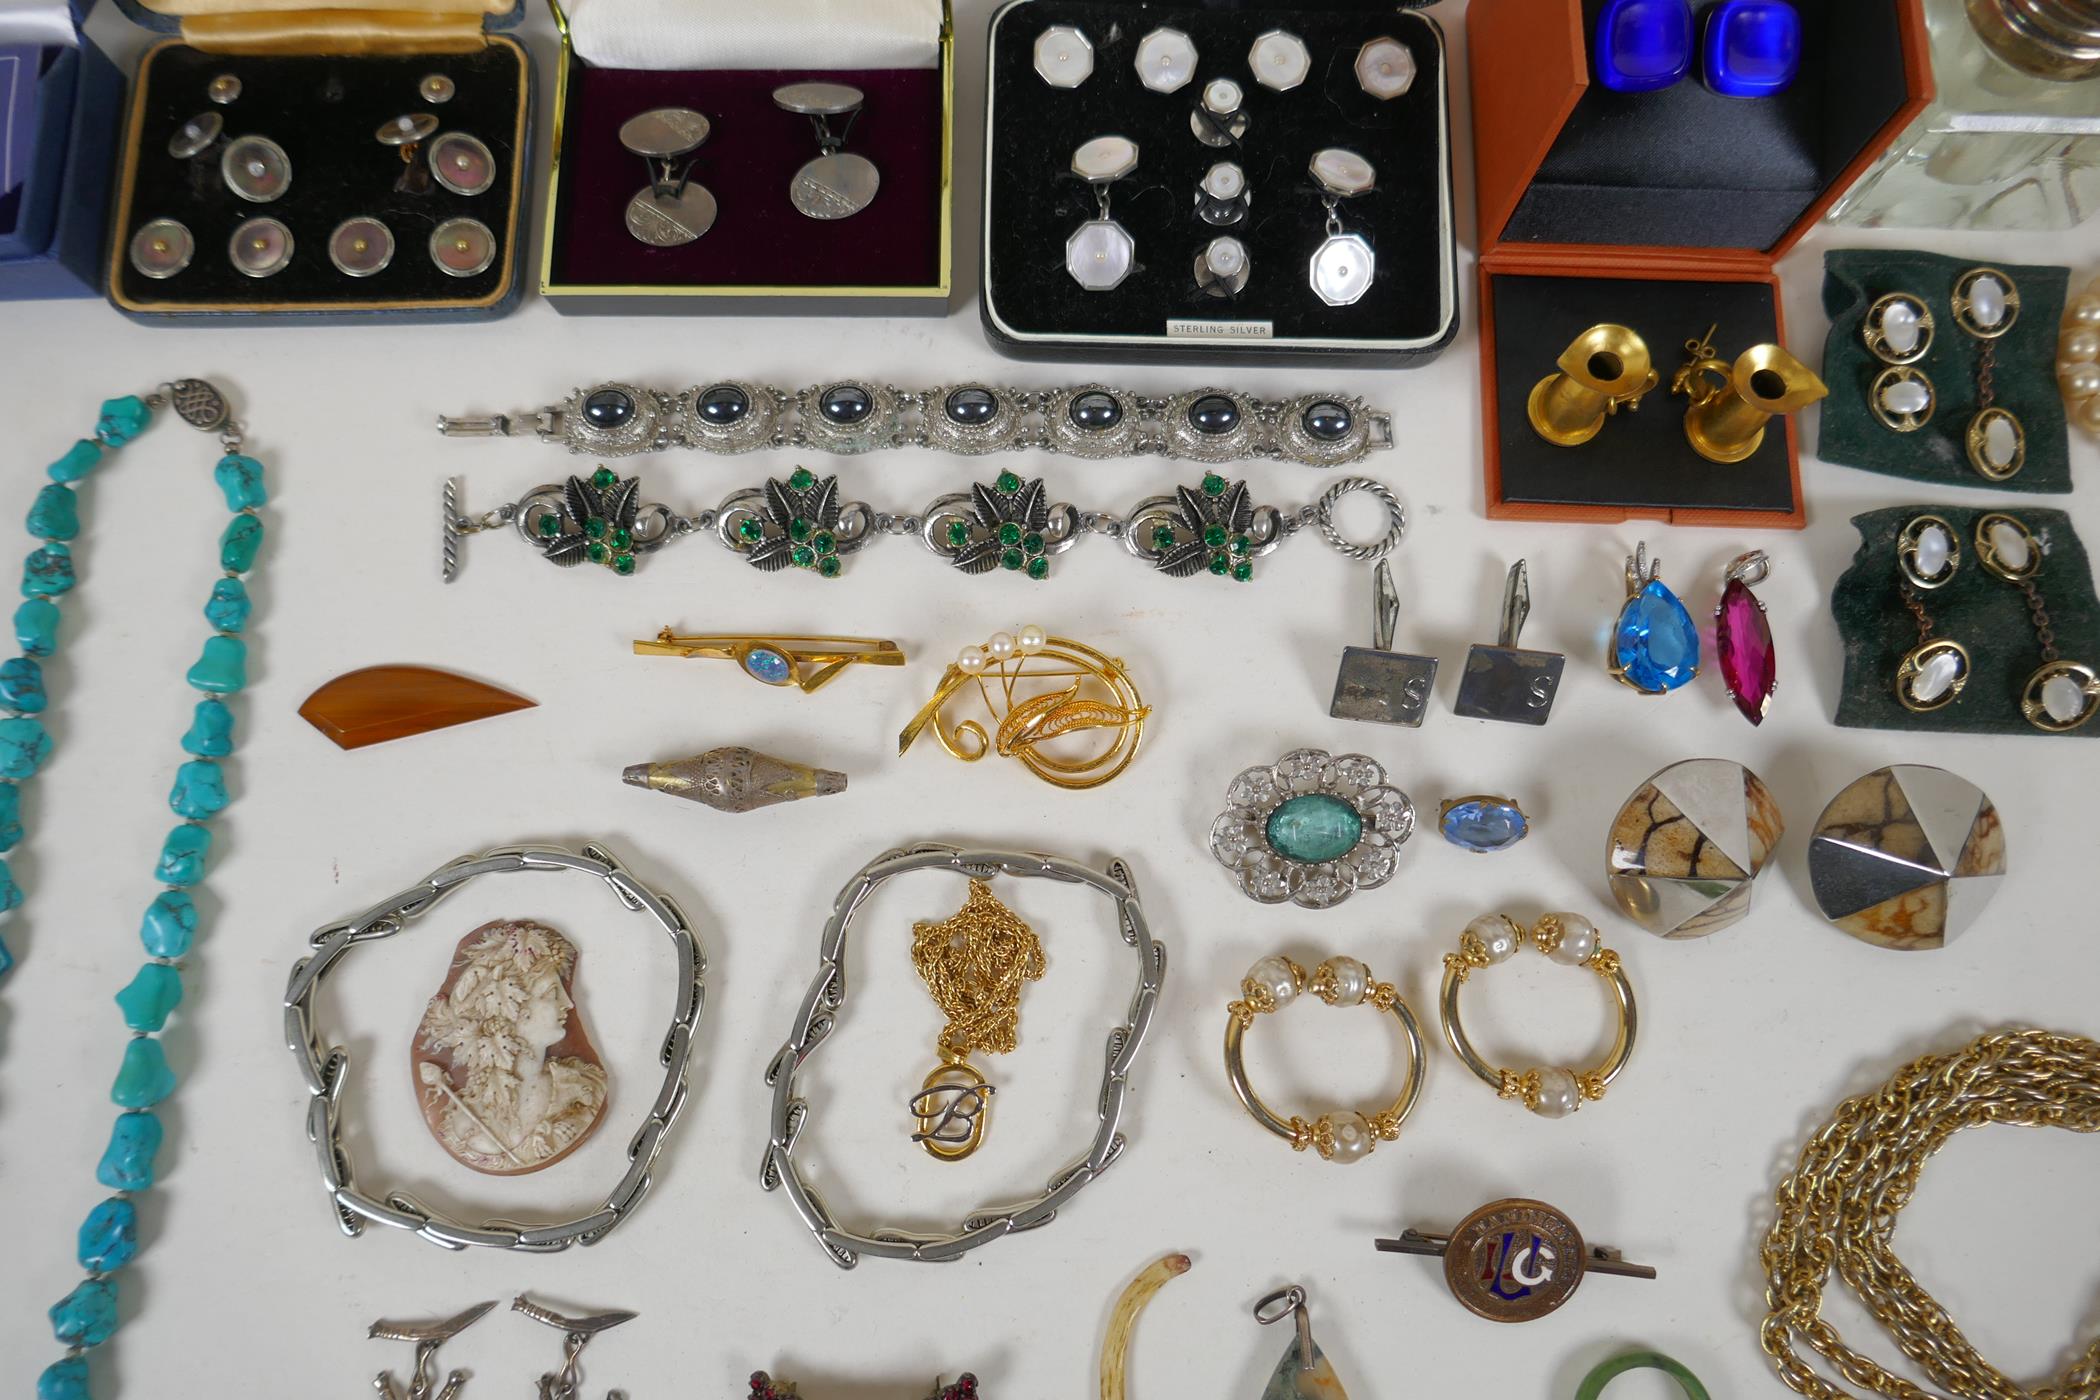 A collection of good quality vintage costume jewellery including brooches, necklaces, earrings, - Image 5 of 8